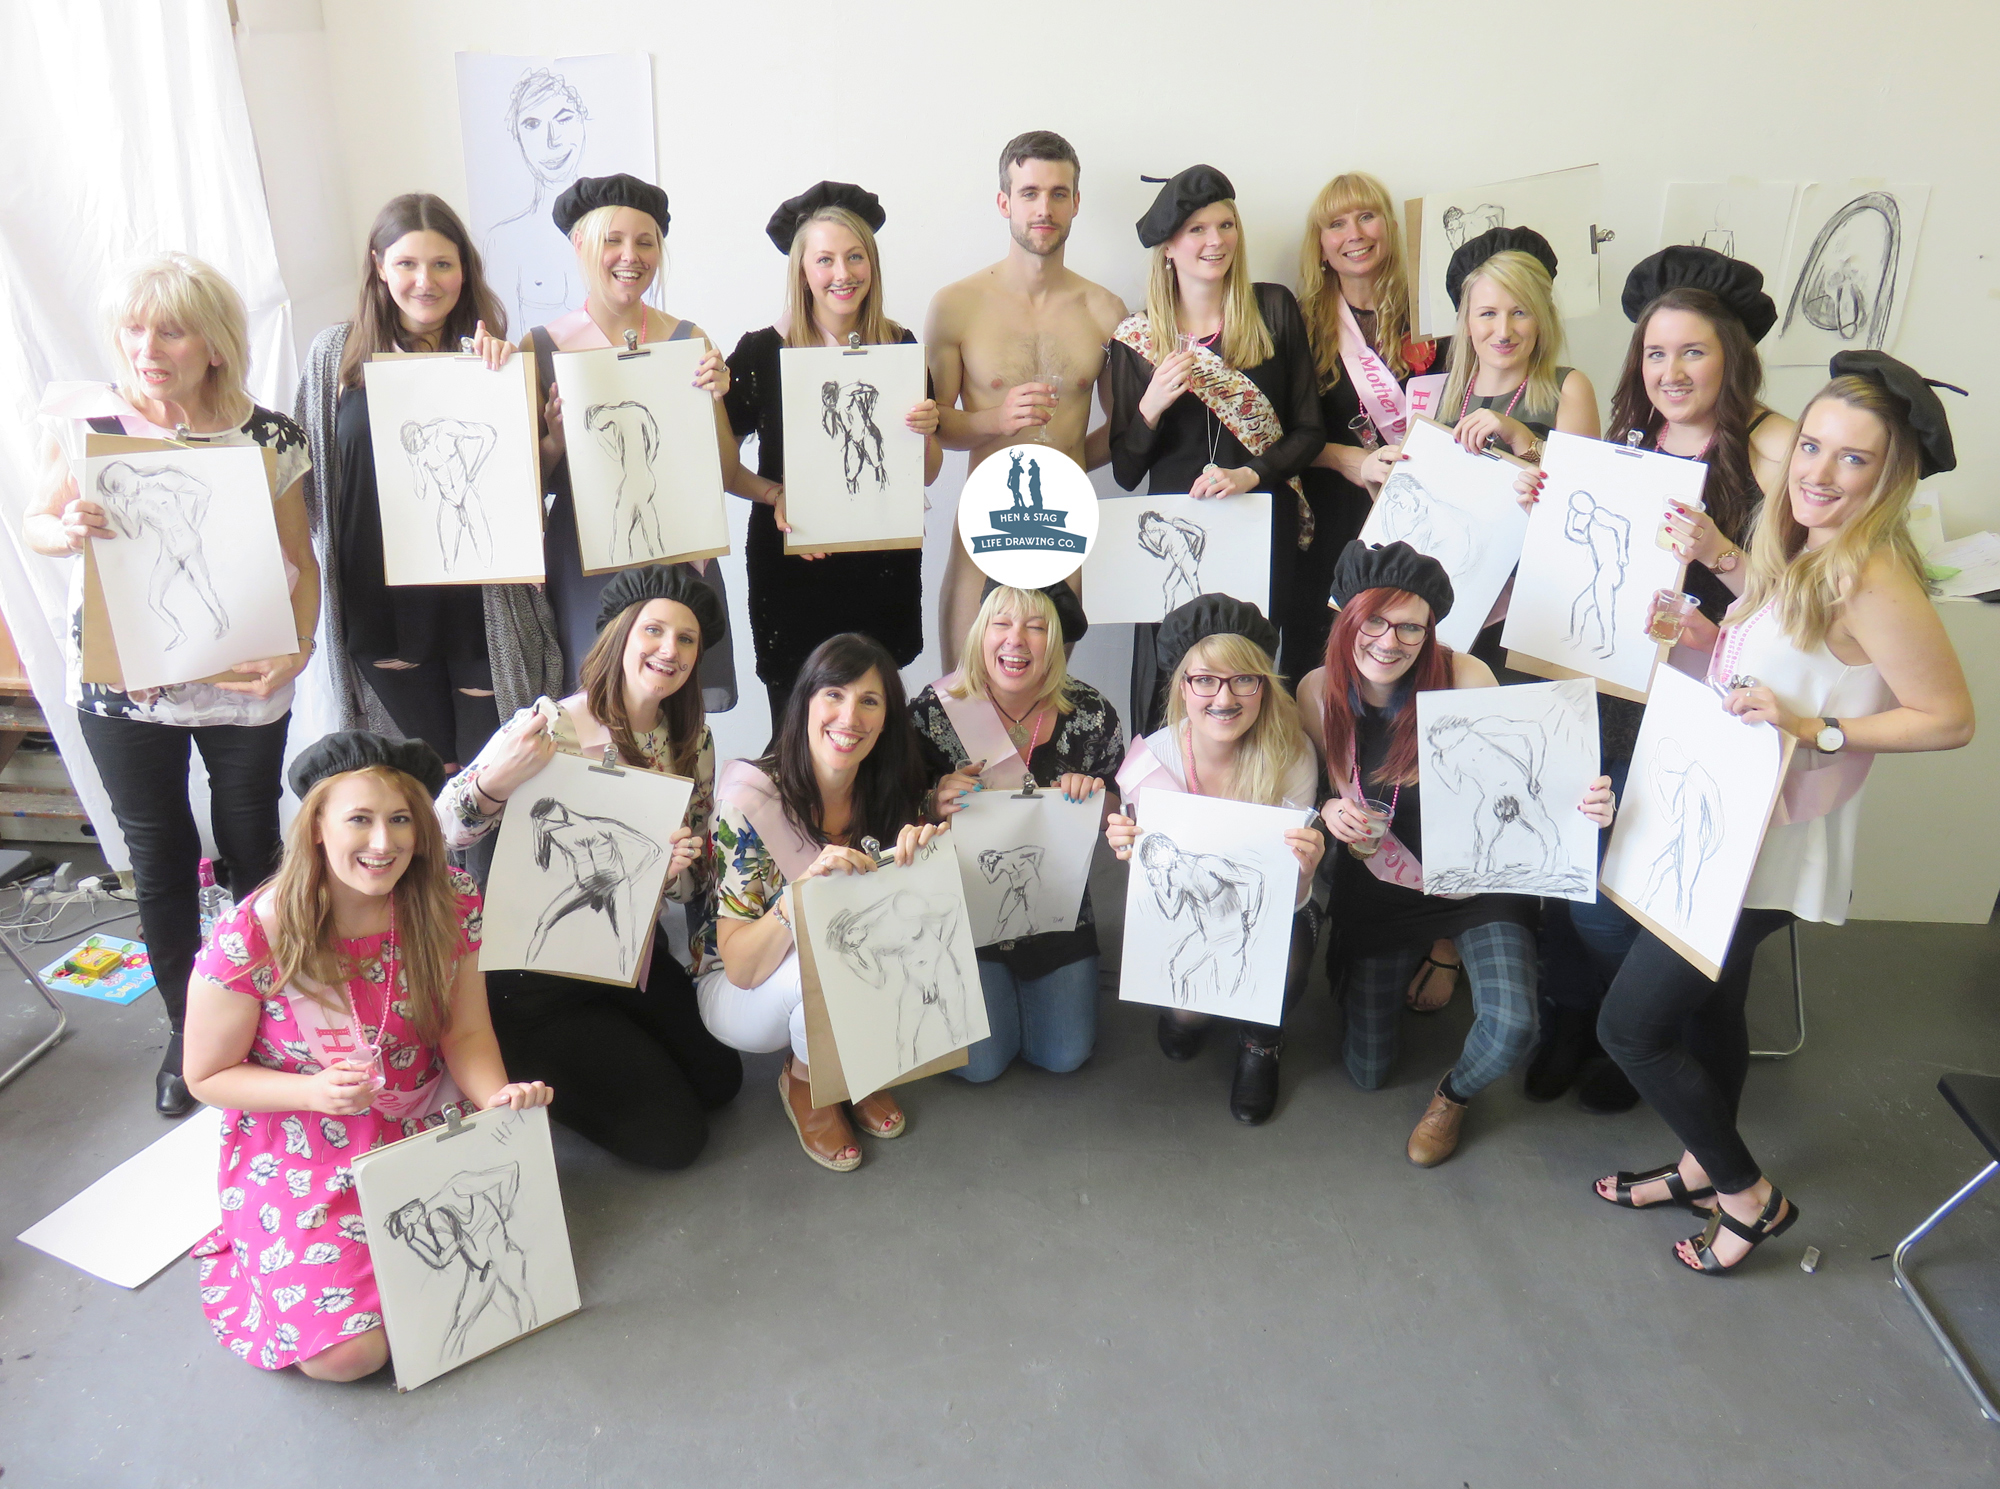 One happy hen party after our life drawing event! 